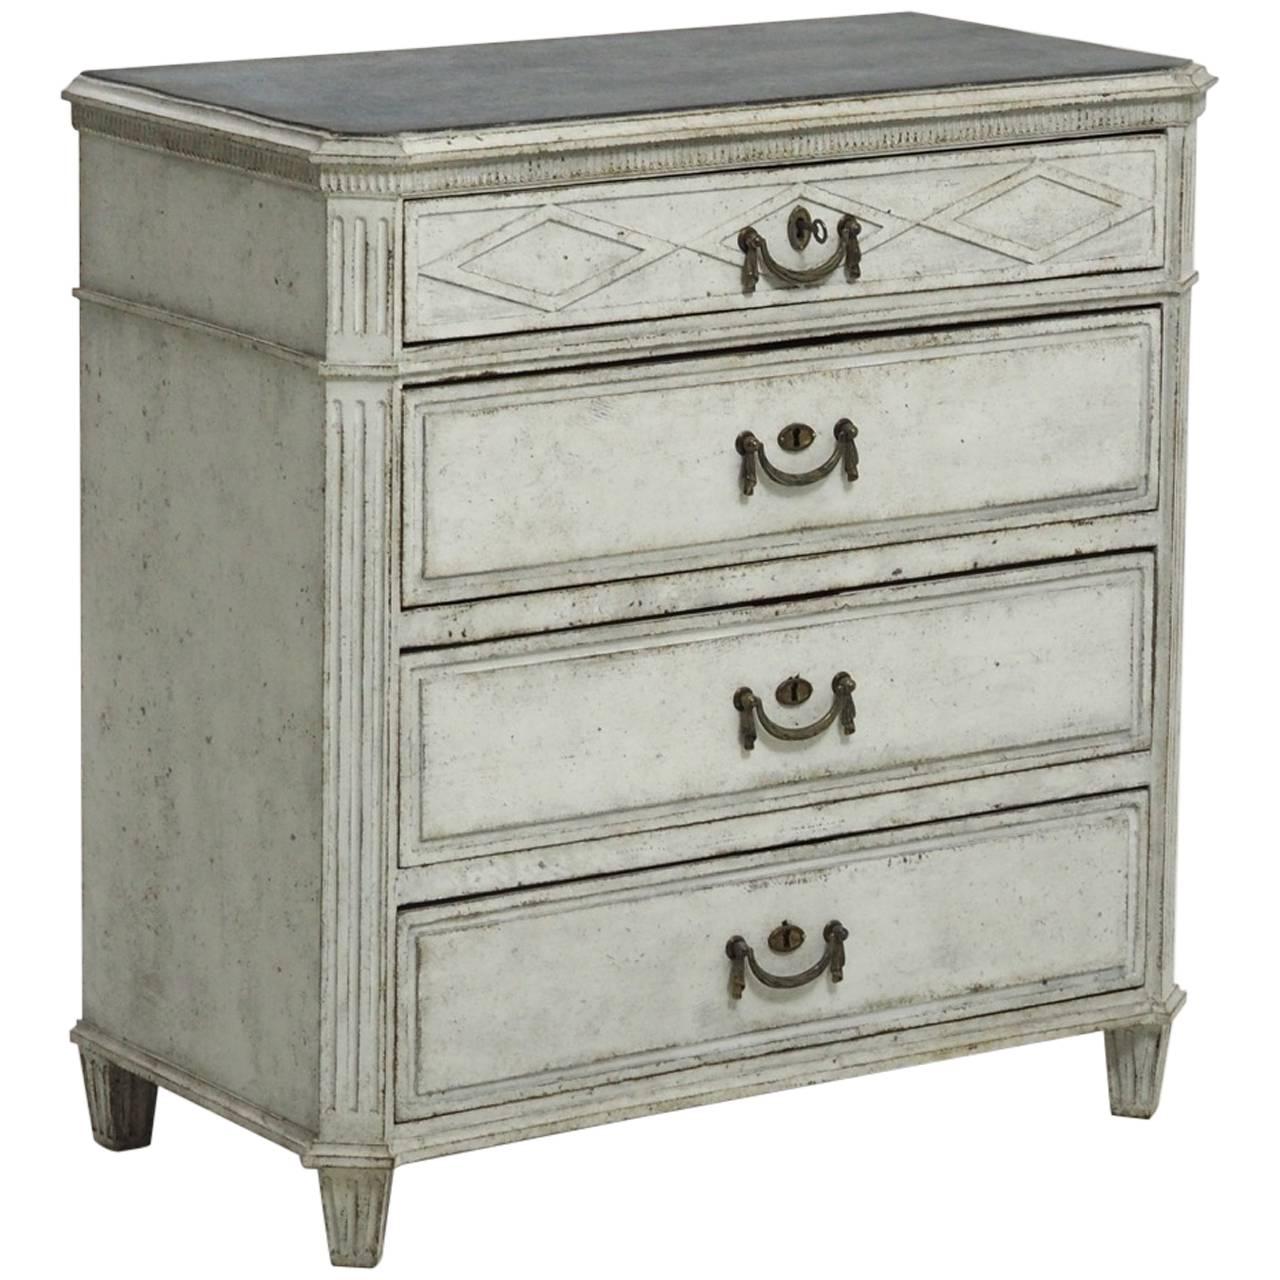 A classically carved Swedish Gustavian painted chest featuring a carved lozenge design on the top drawer, fluted corner posts, tapered and fluted legs, and brass swag motif drawer pulls.

The Gustavian style, named after King Gustav III of Sweden,